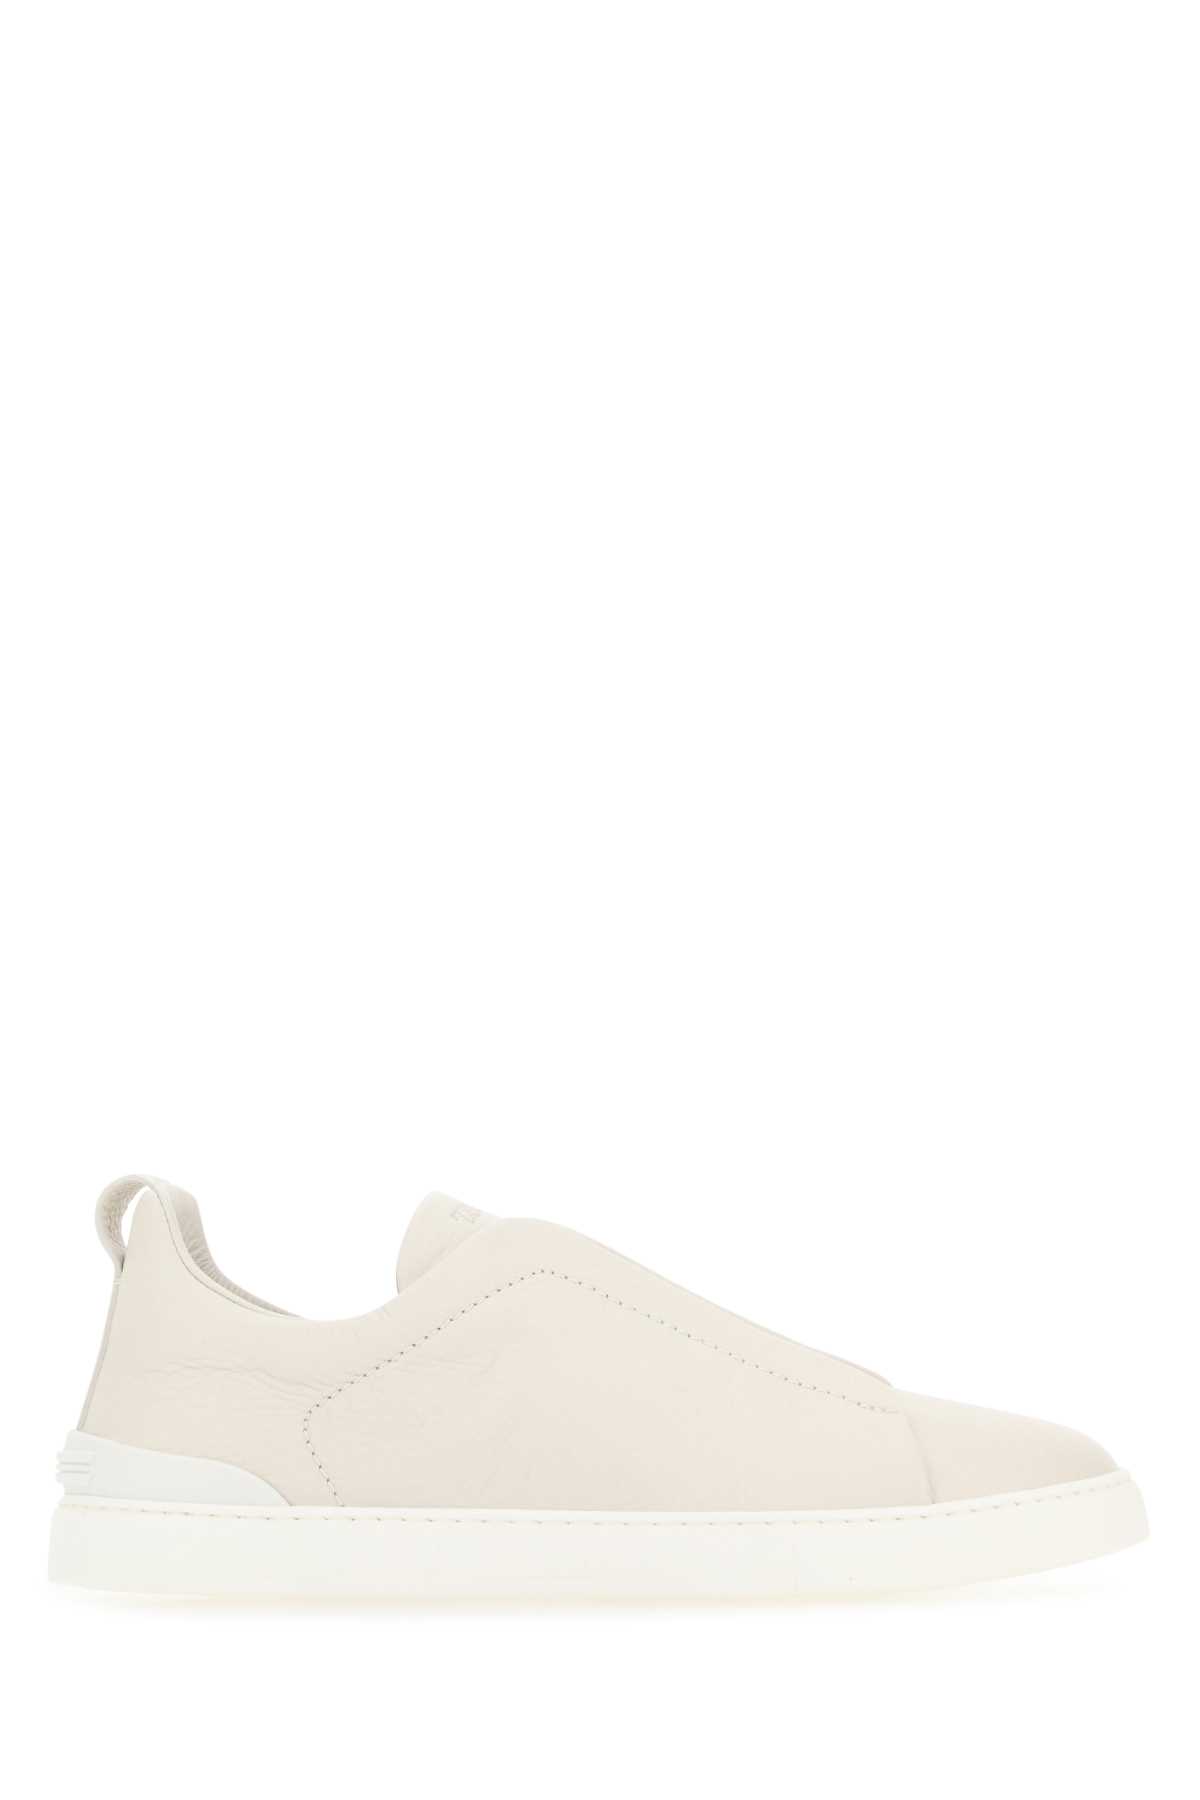 Ivory Leather Slip Ons